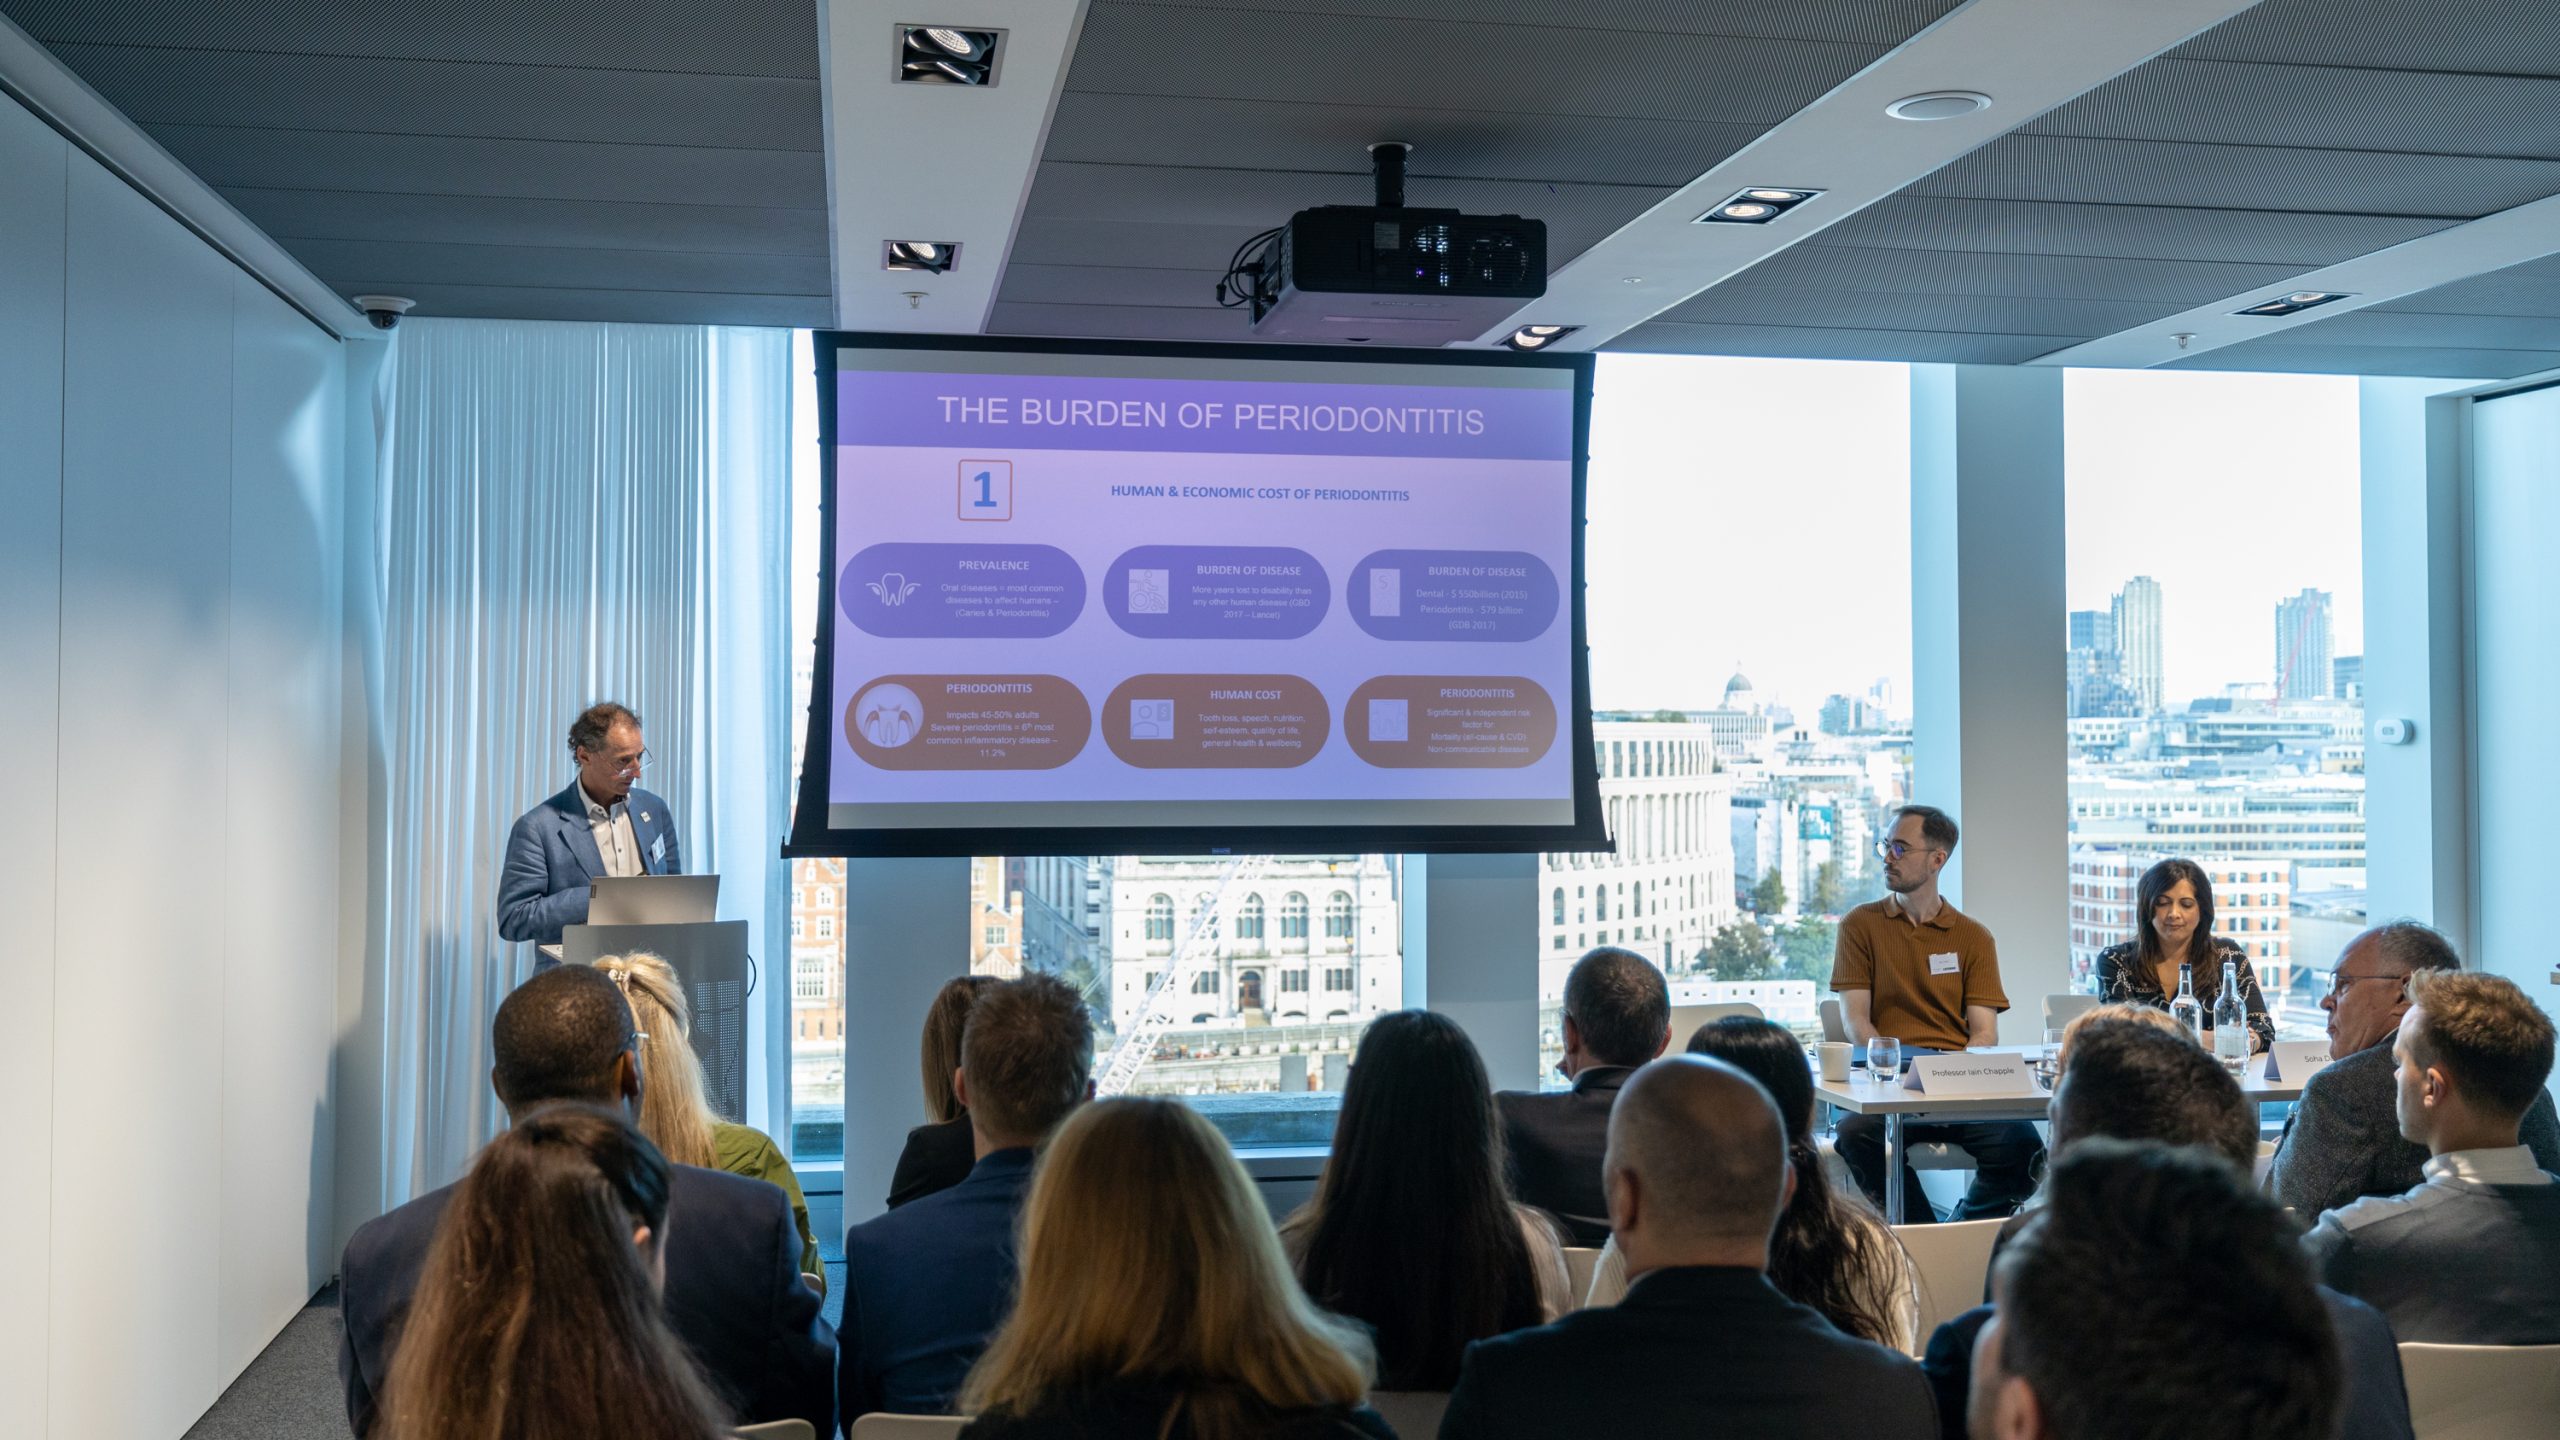 On the morning of 10th October, Johnson & Johnson Ltd., the makers of Listerine hosted a press briefing at Ogilvy & Mather Sea Containers in London to provide an update on the efficacy of mouthwash use.